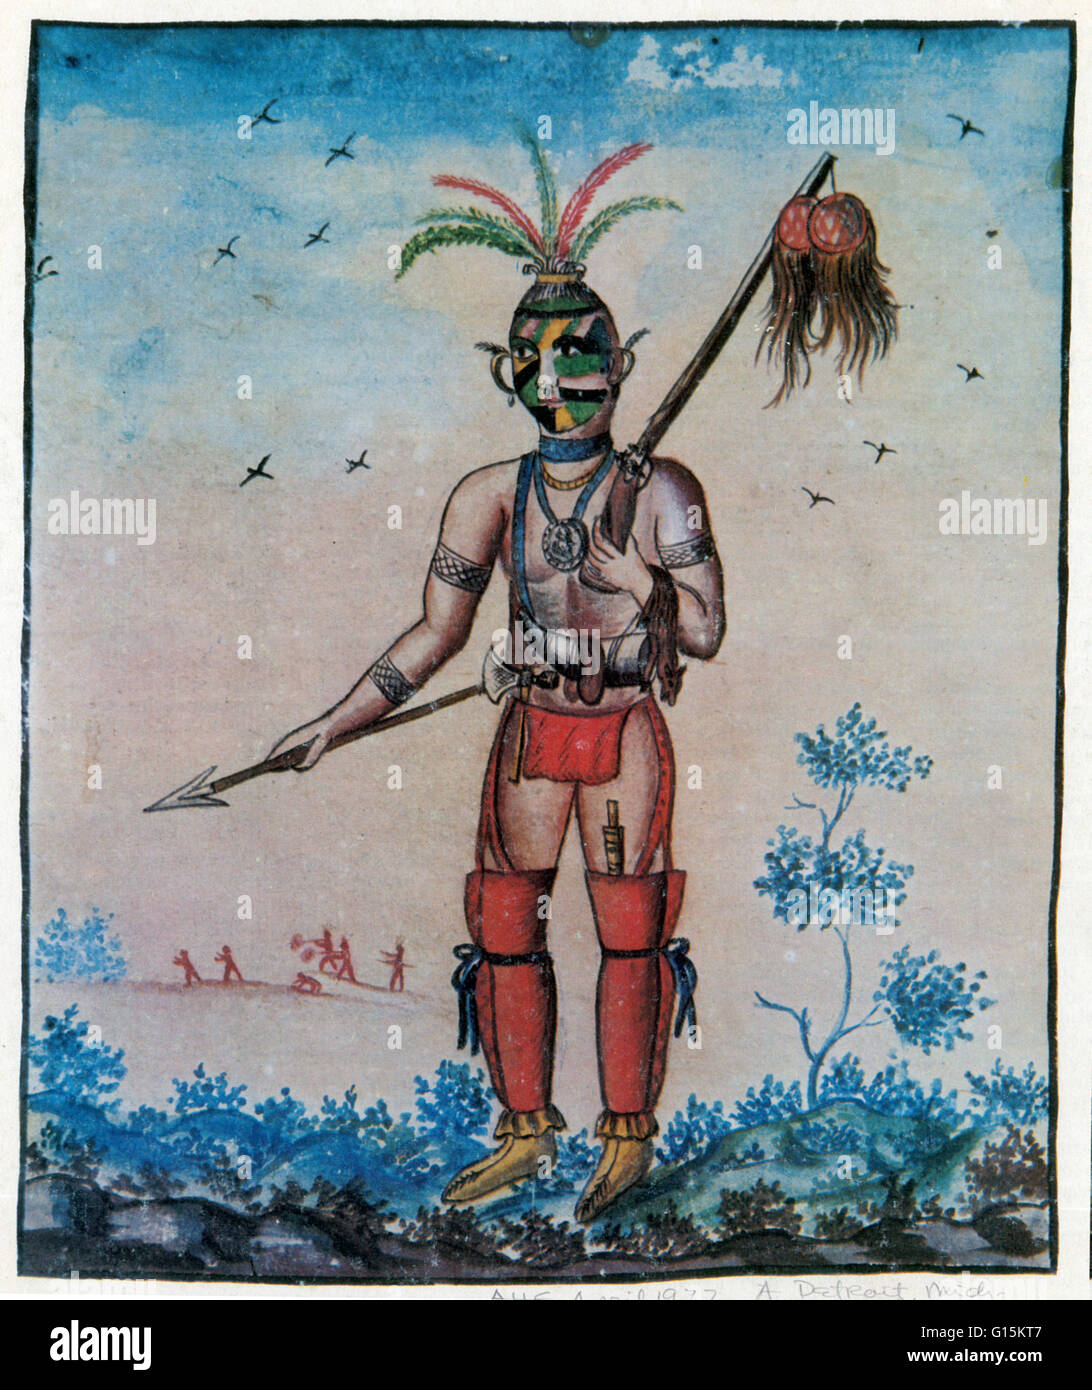 A mid-18th century painting by an unknown French artist of a Native American man with scalps in the area that is now Detroit, Michigan. During the French and Indian War, French colonists offered payments to Native Americans for British scalps. Stock Photo